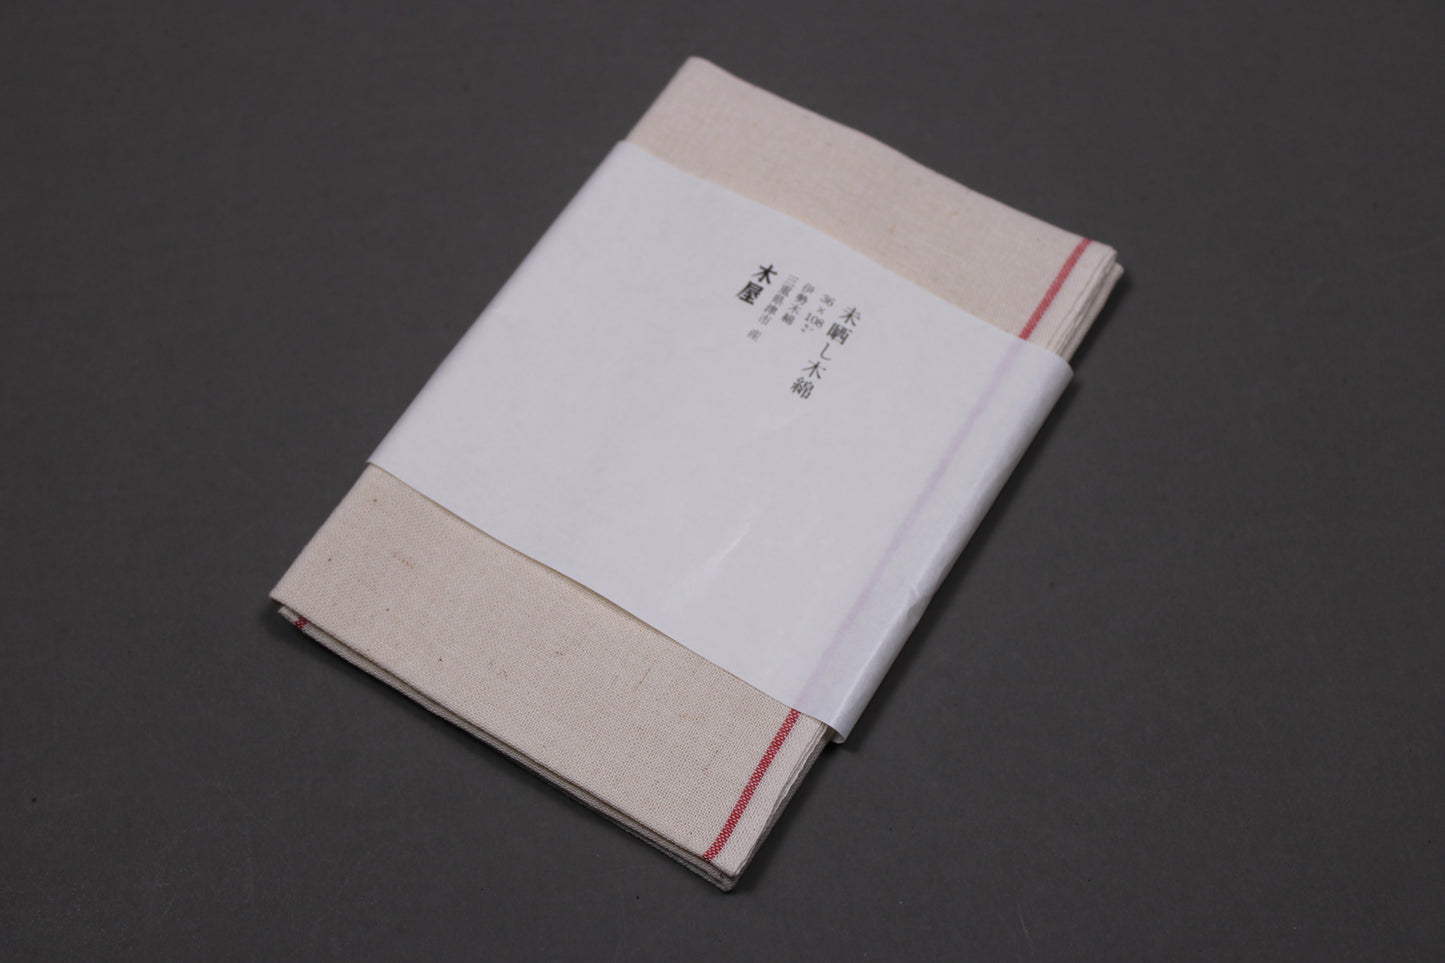 kiya unbleached cotton cloth pack of 3 sarashi folded neatly with paper wrapping displays brand and items